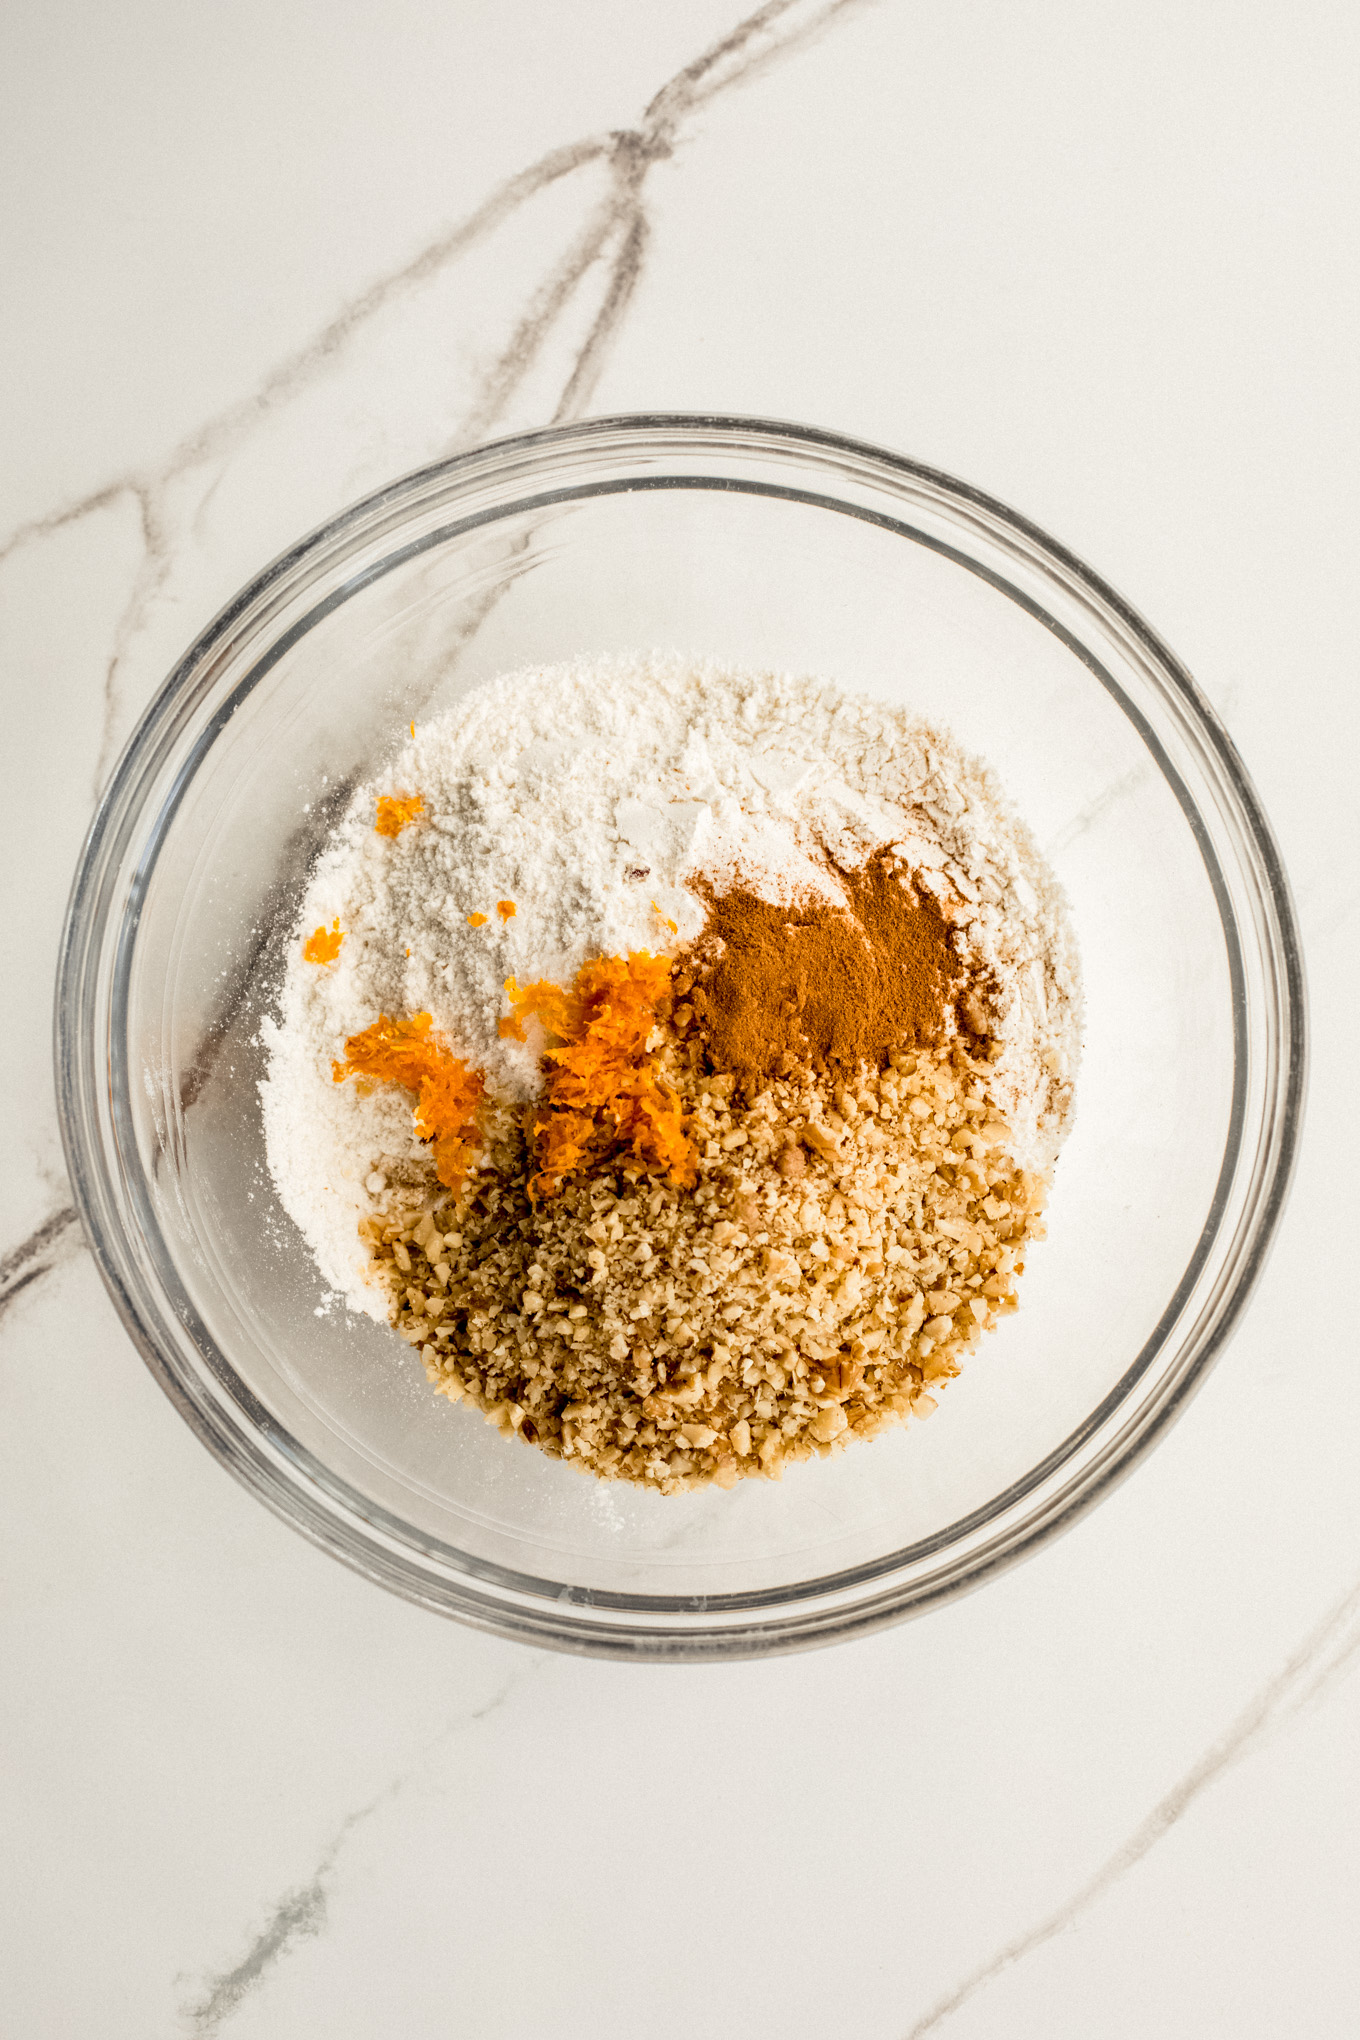 dry ingredients in a glass bowl.